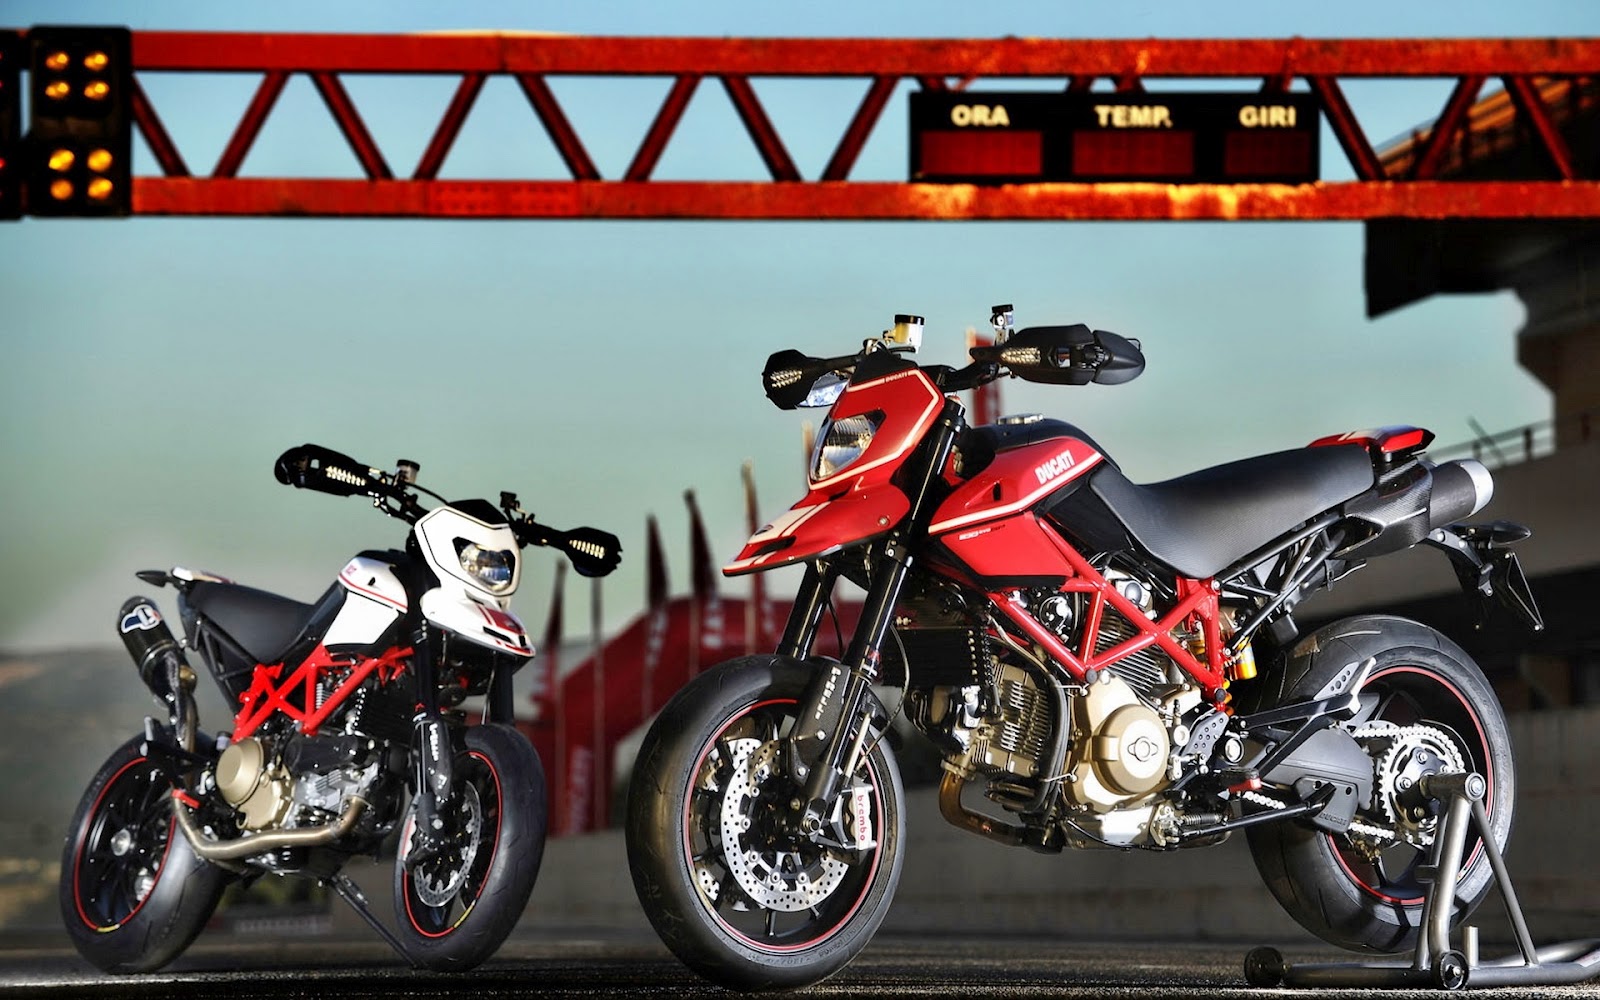 hd bikes wallpapers for android,land vehicle,vehicle,motorcycle,car,motorcycling